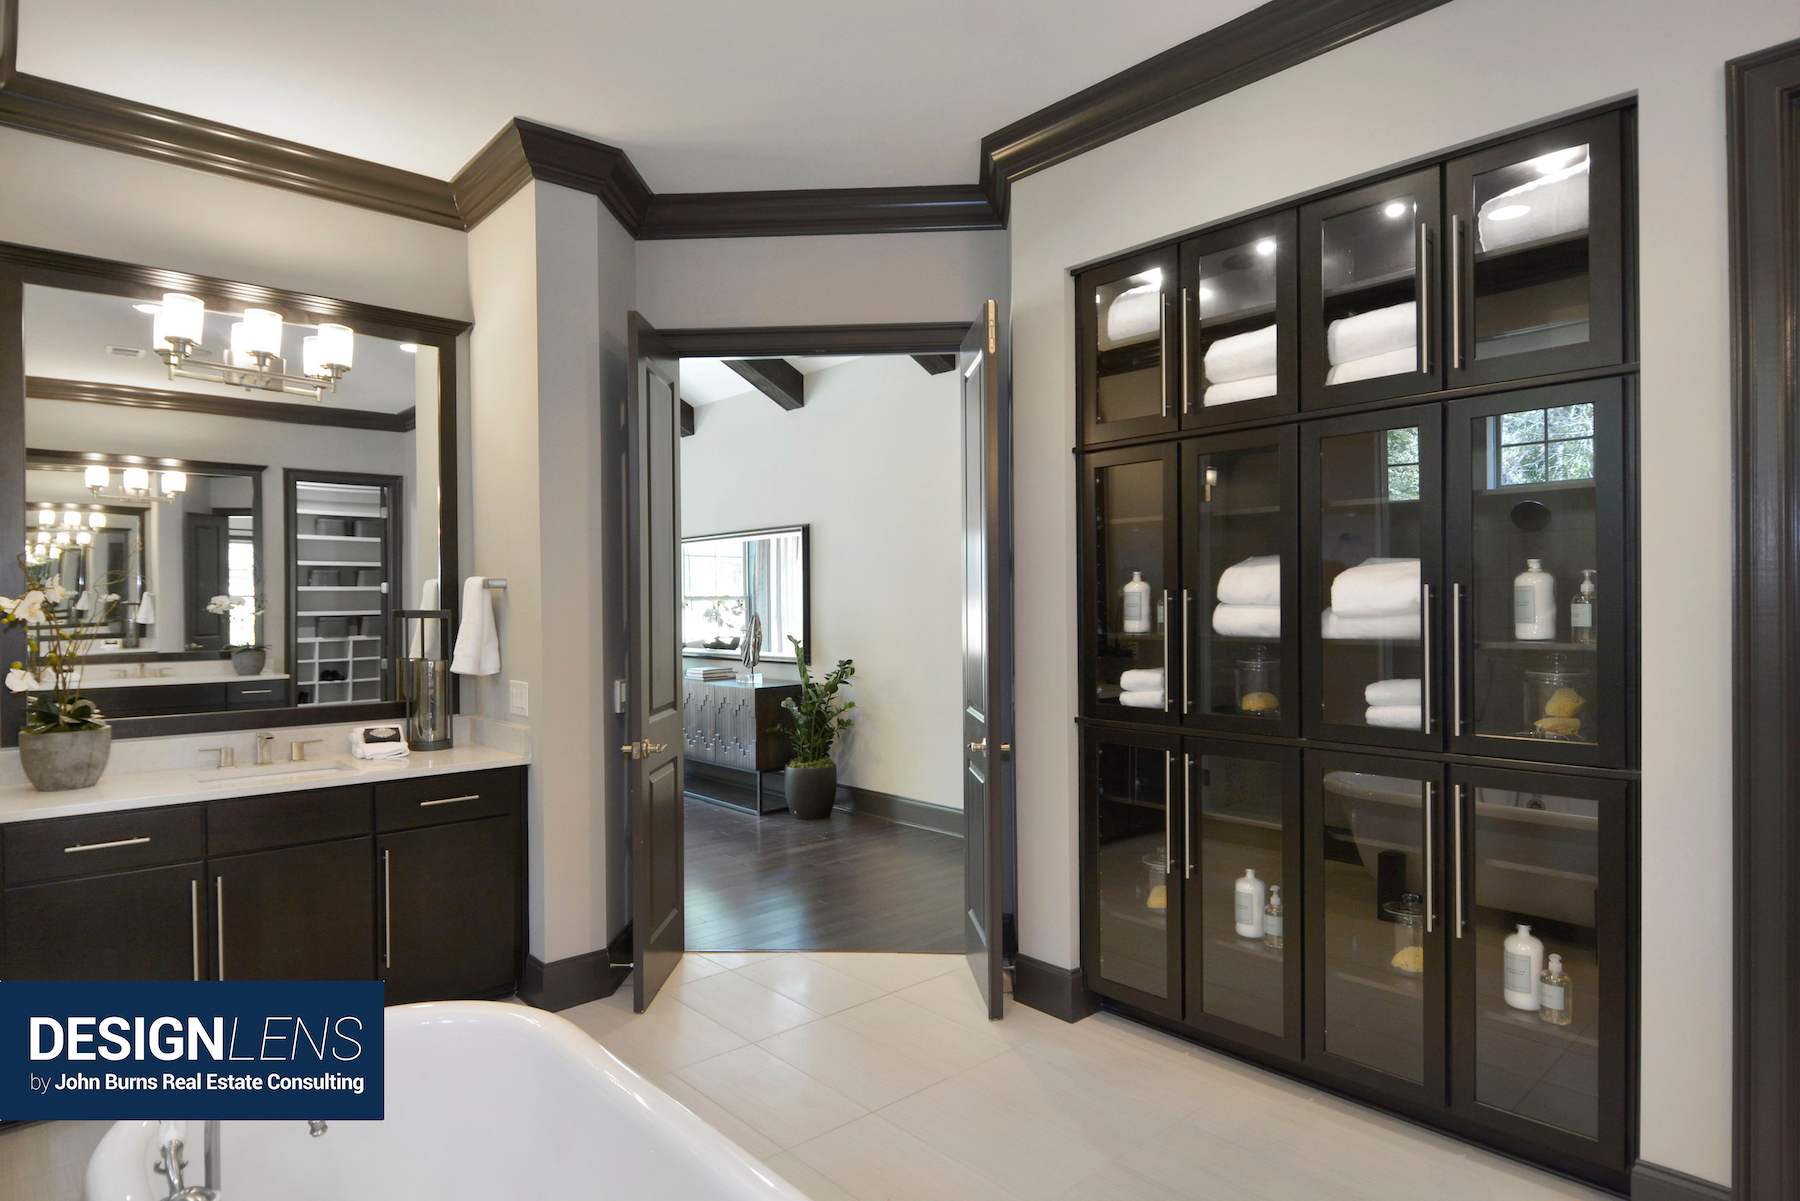 Ladera by Lennar, Waxhaw, N.C. 5 Top Bathroom Design Trends for 2021 ConstructUtopia.com